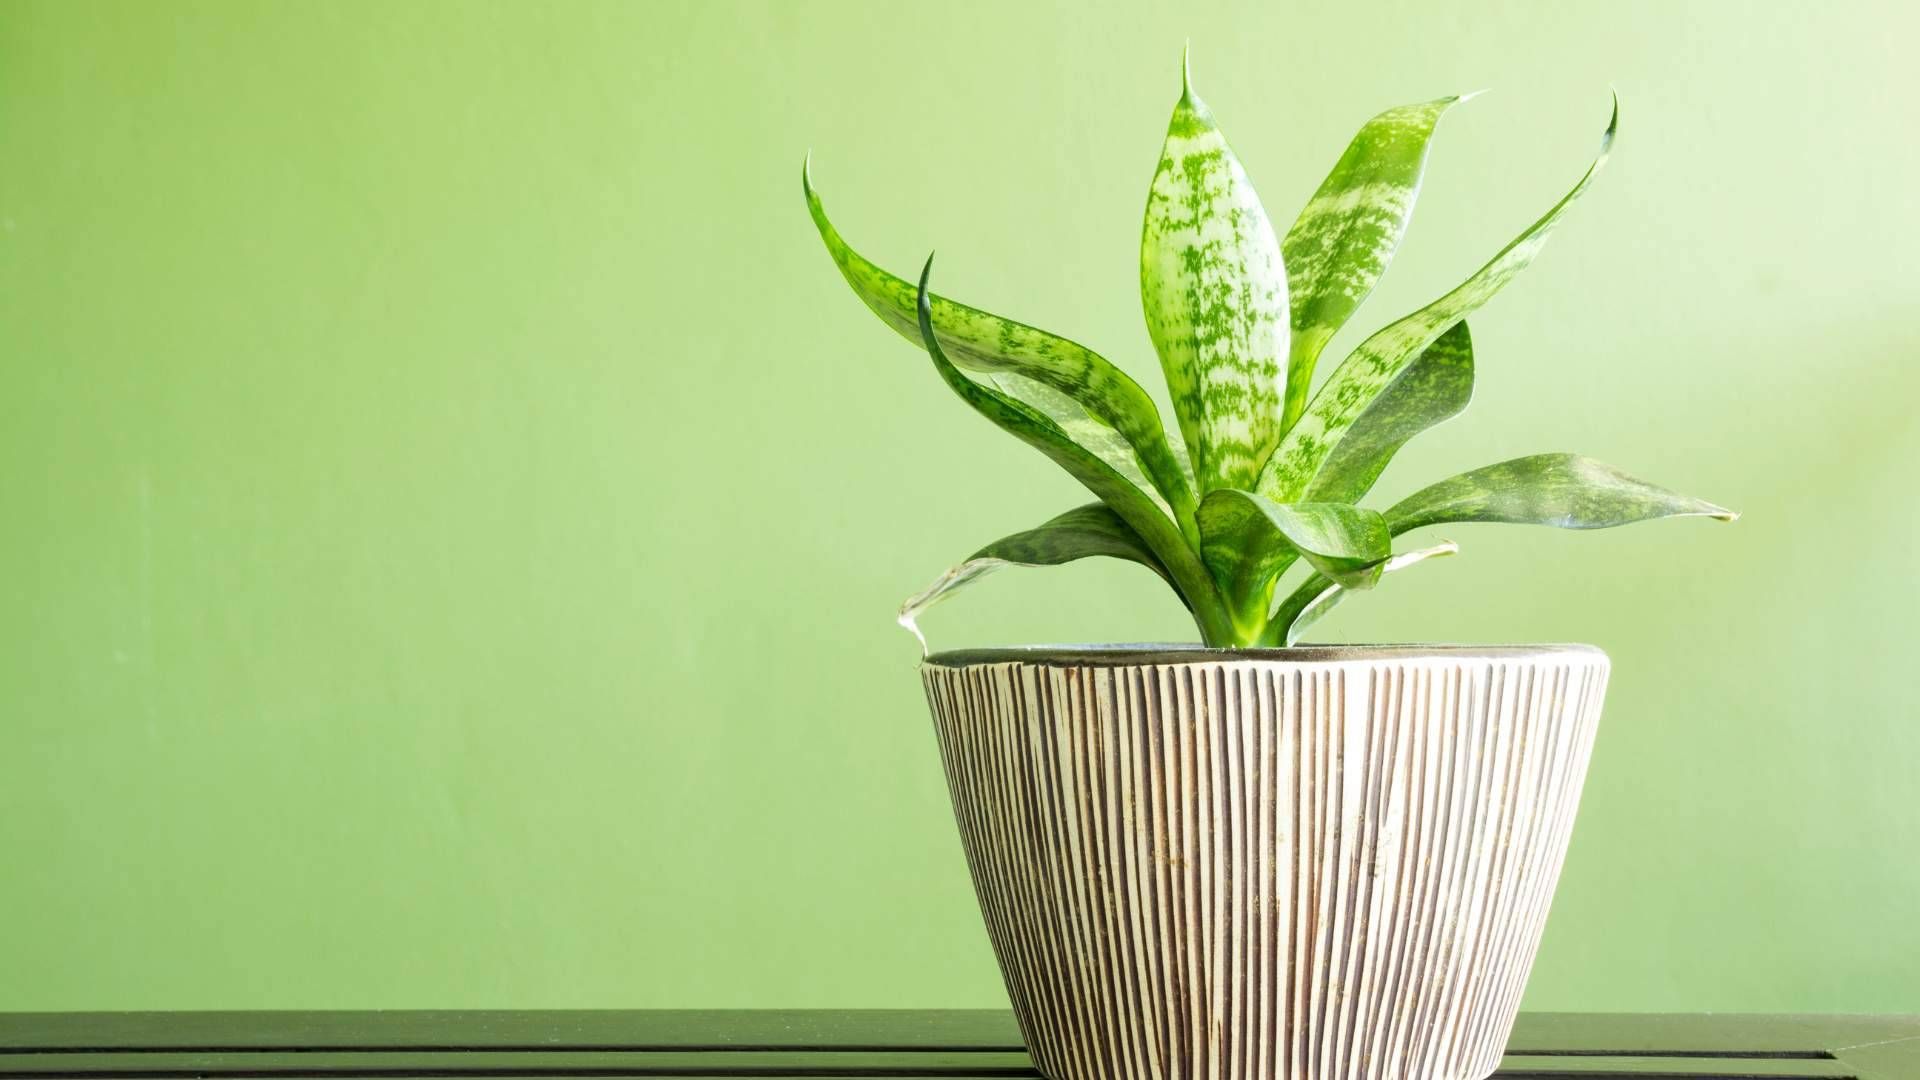 Elevate your home’s appeal with plants